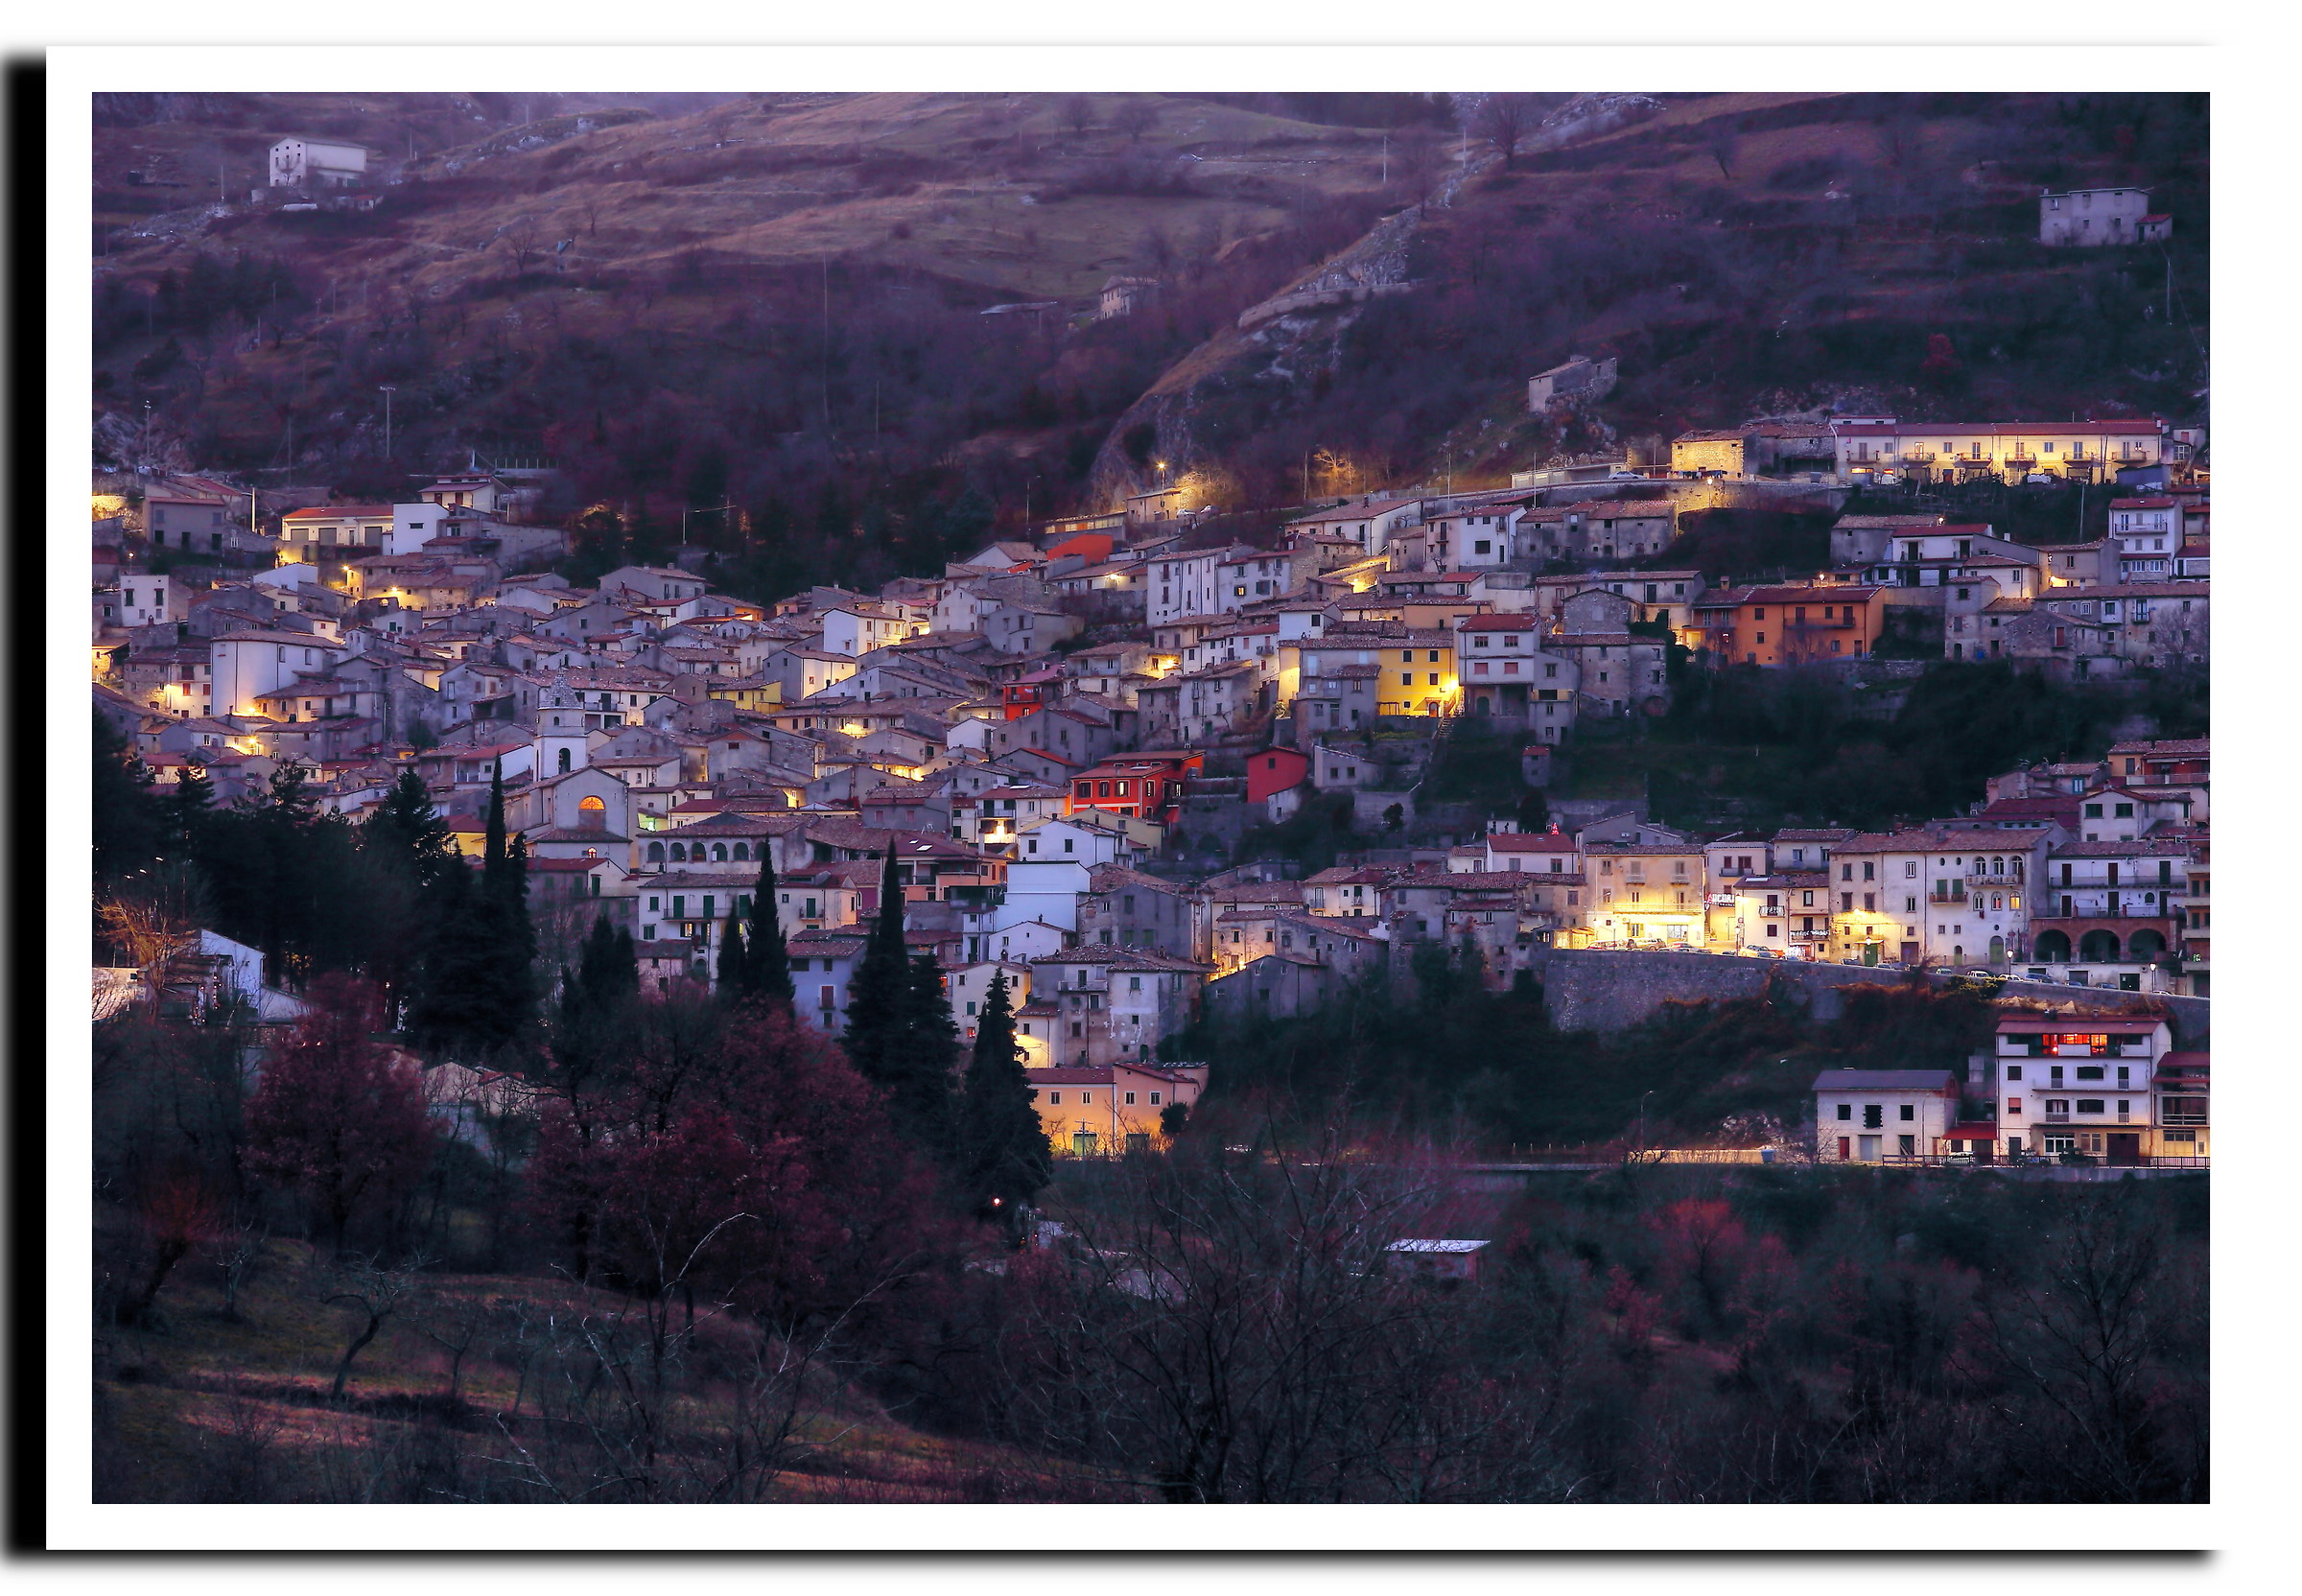 Postcard from Molise...